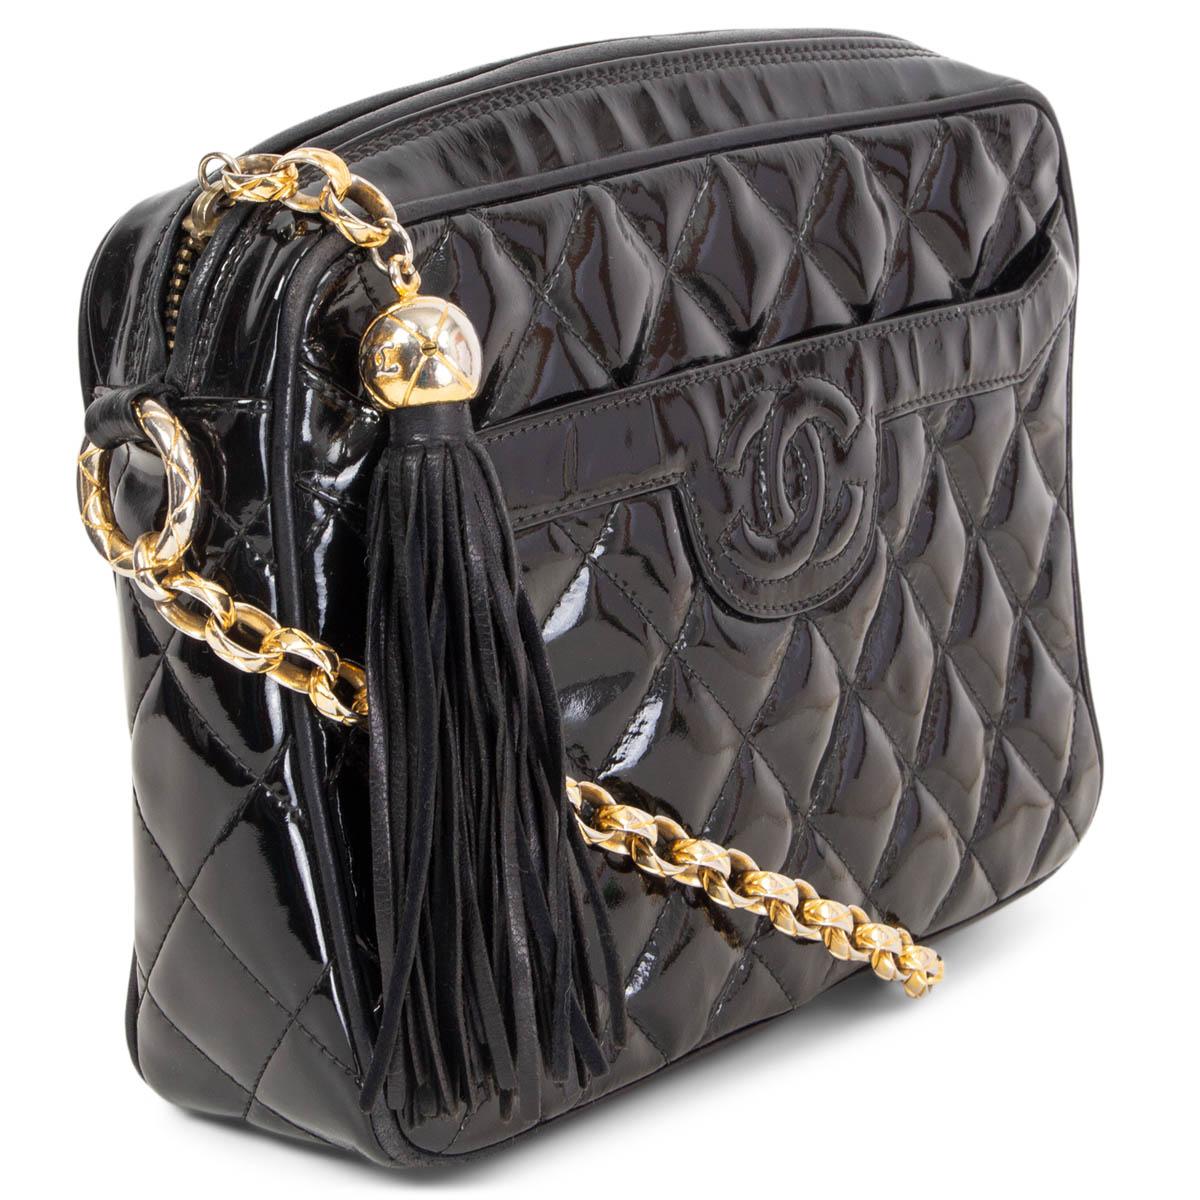 100% authentic Chanel tassel camera shoulder bag in black patent leather with gold-tone chain strap and a front pocket with CC logo stitching. Opens with a tassel zipper on top and is lined in black smooth lambskin with one zipper pocket against the